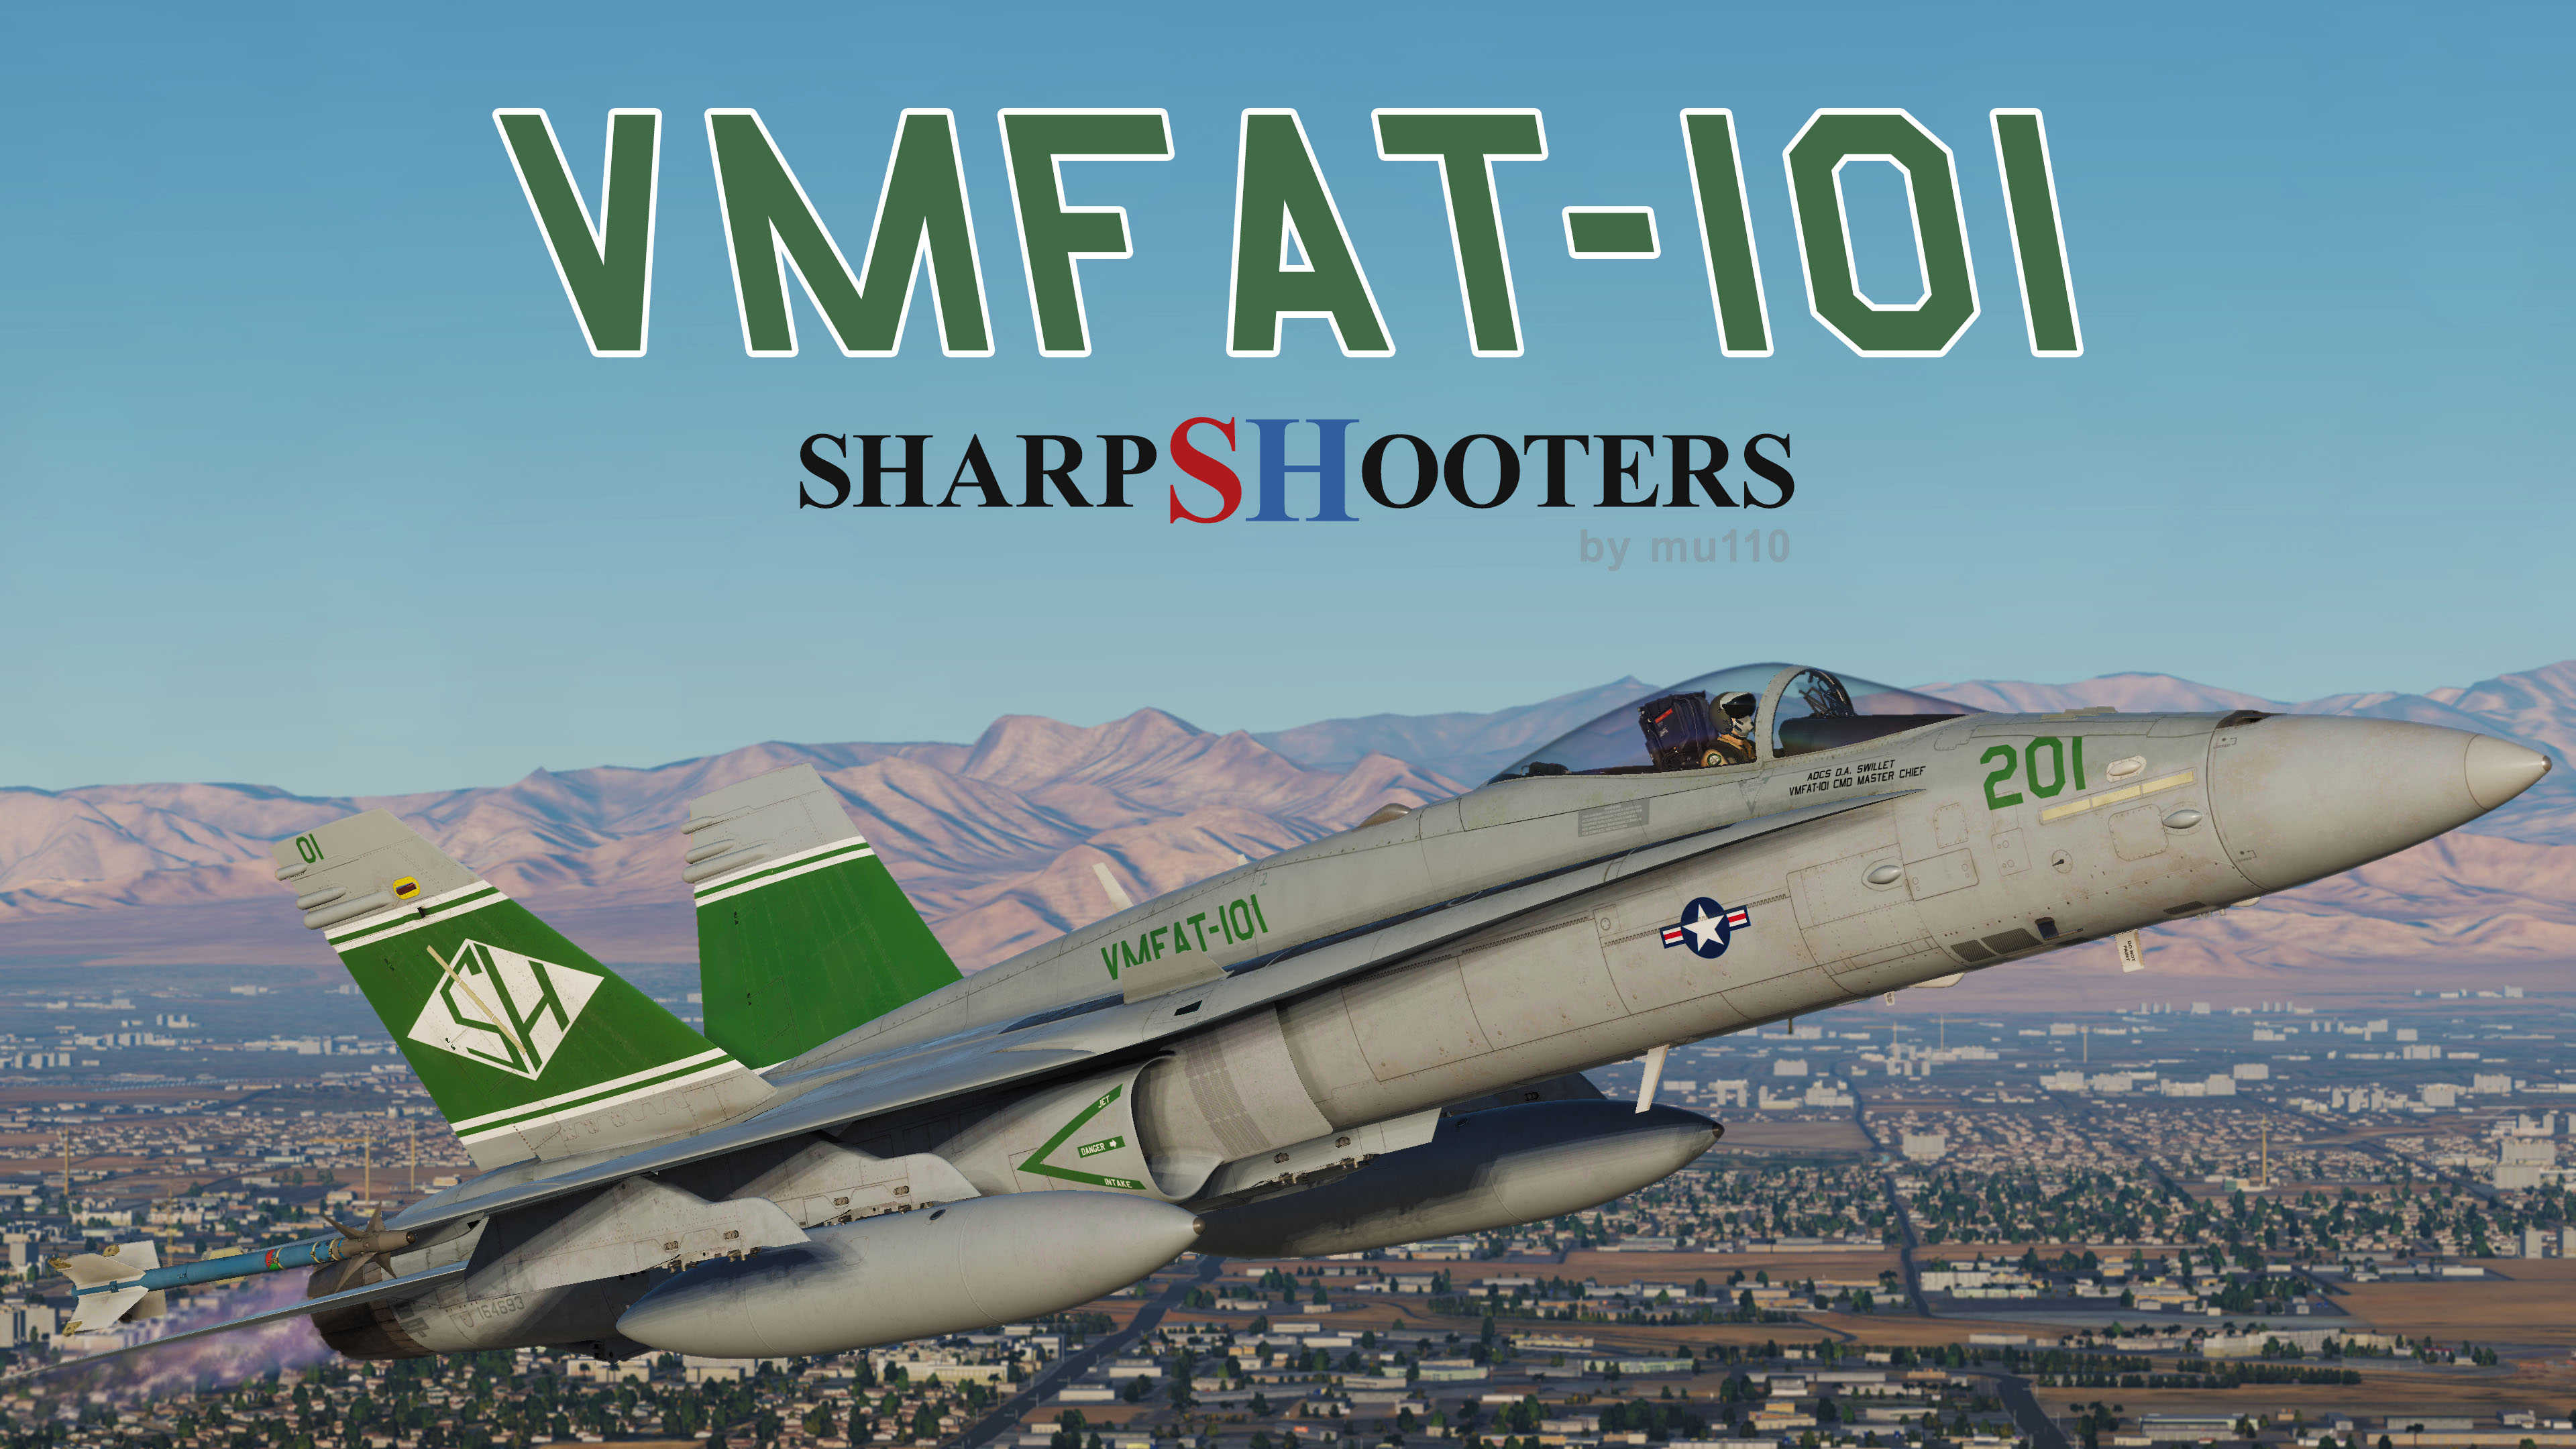 VMFAT-101 Liveries for the F/A-18C!